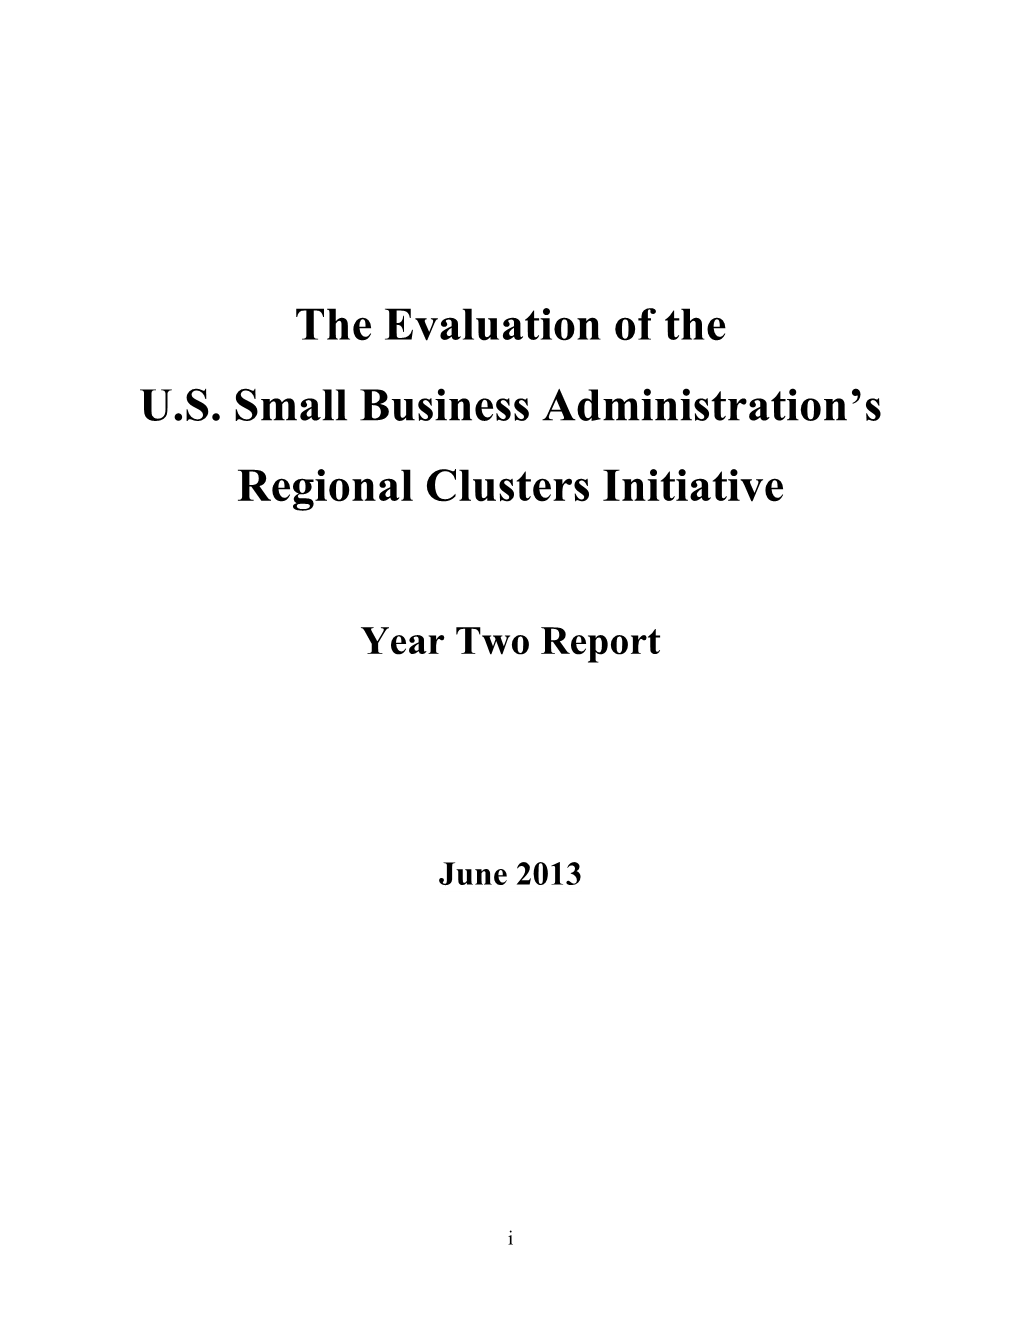 The Evaluation of US Small Business Administrations Regional Clusters Initiative